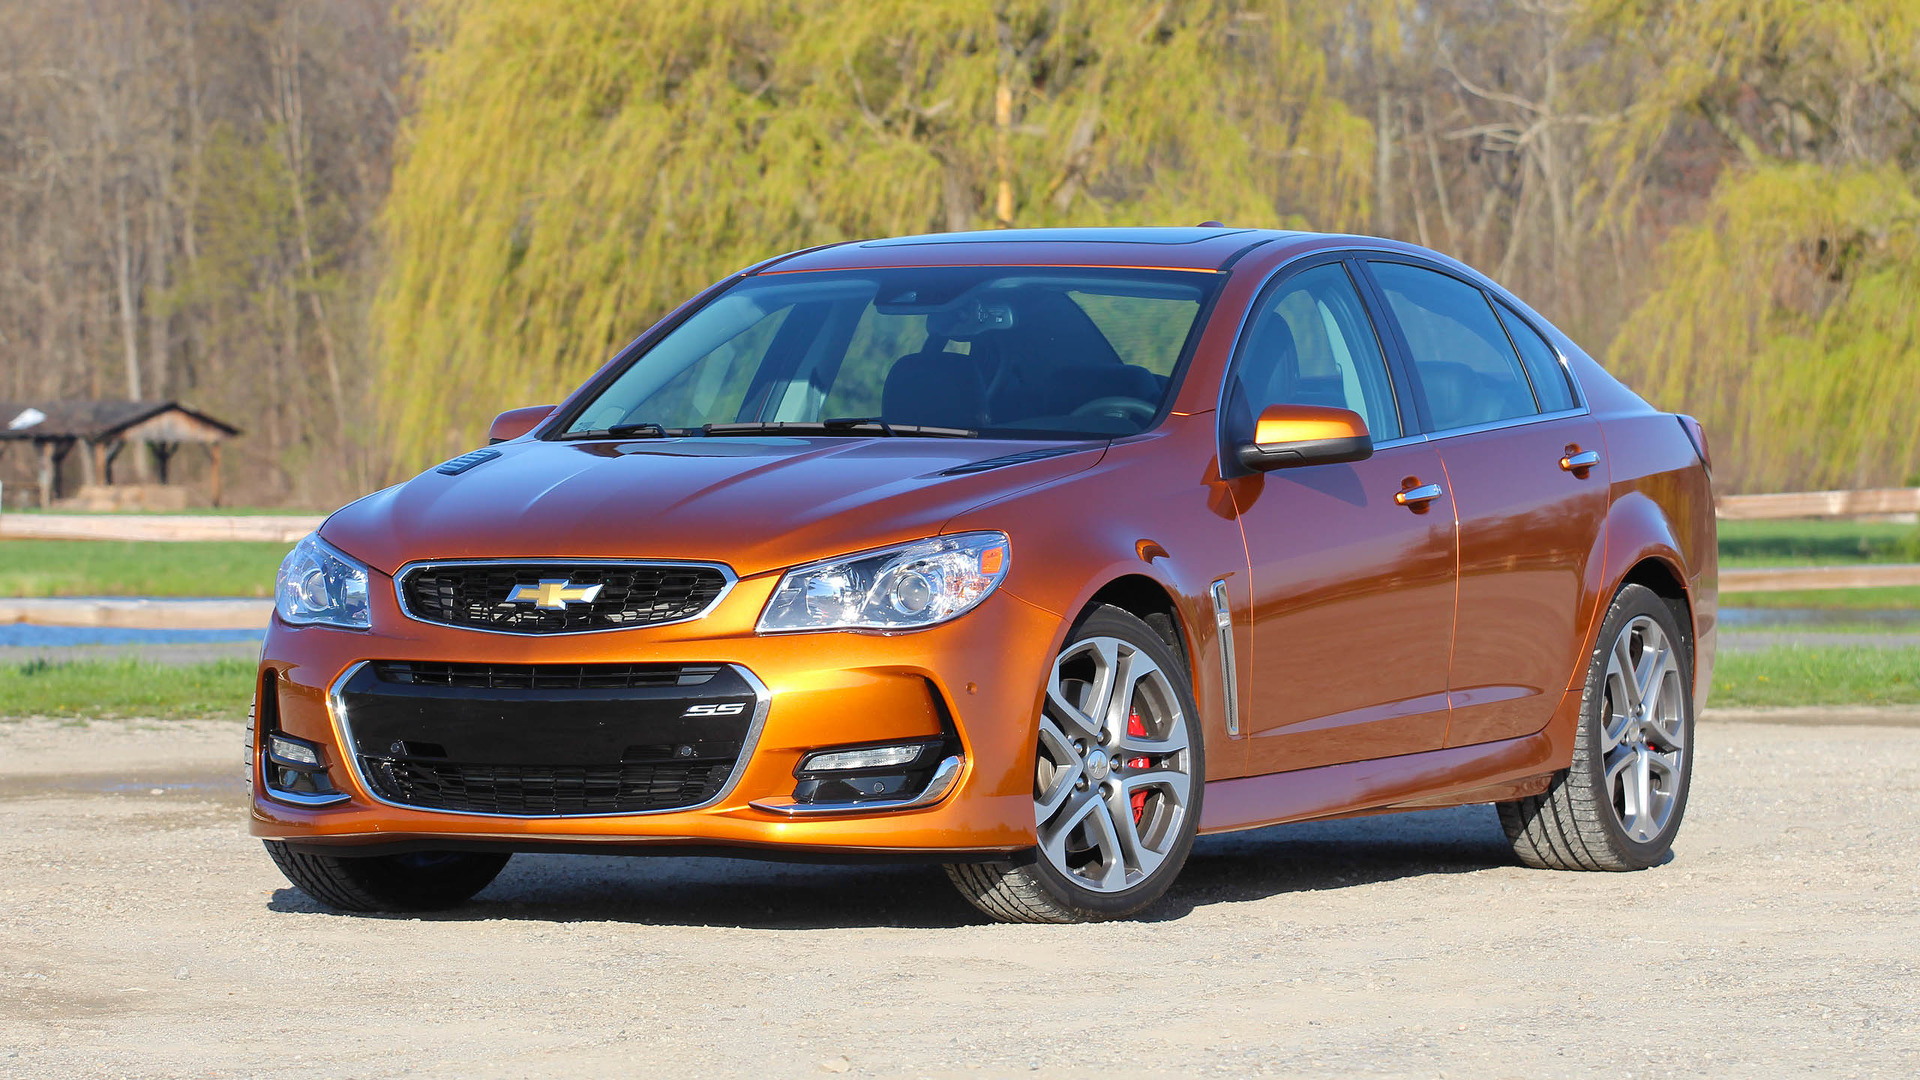 2017 Chevy SS Review: Goodnight, Sweet Prince